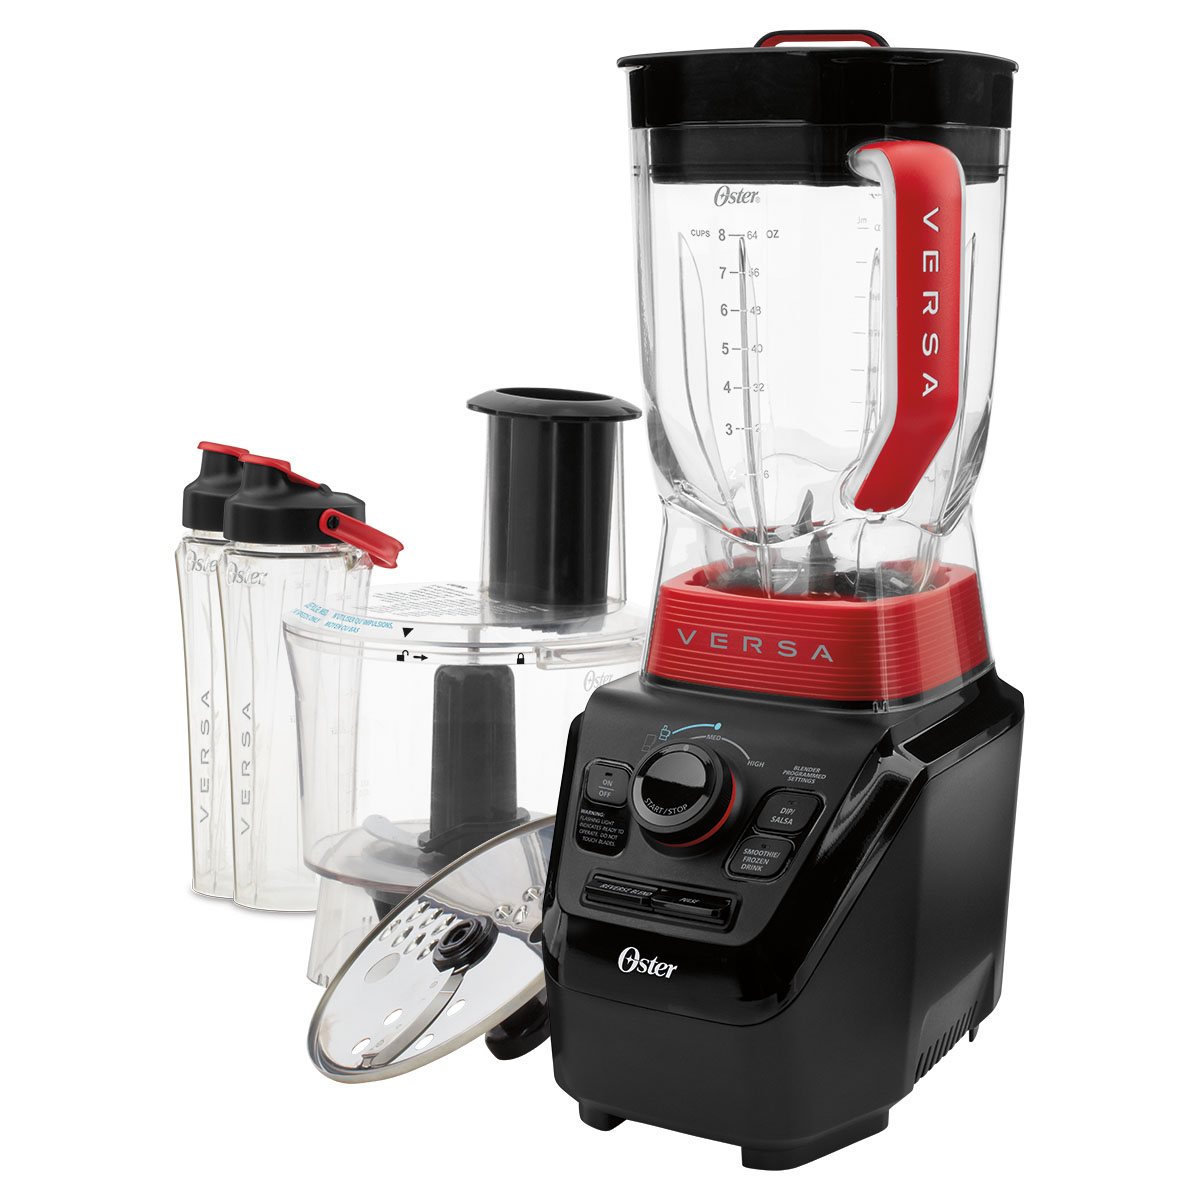 Oster Versa 1100 Series Performance Red Variable Speed Blender - image 1 of 7